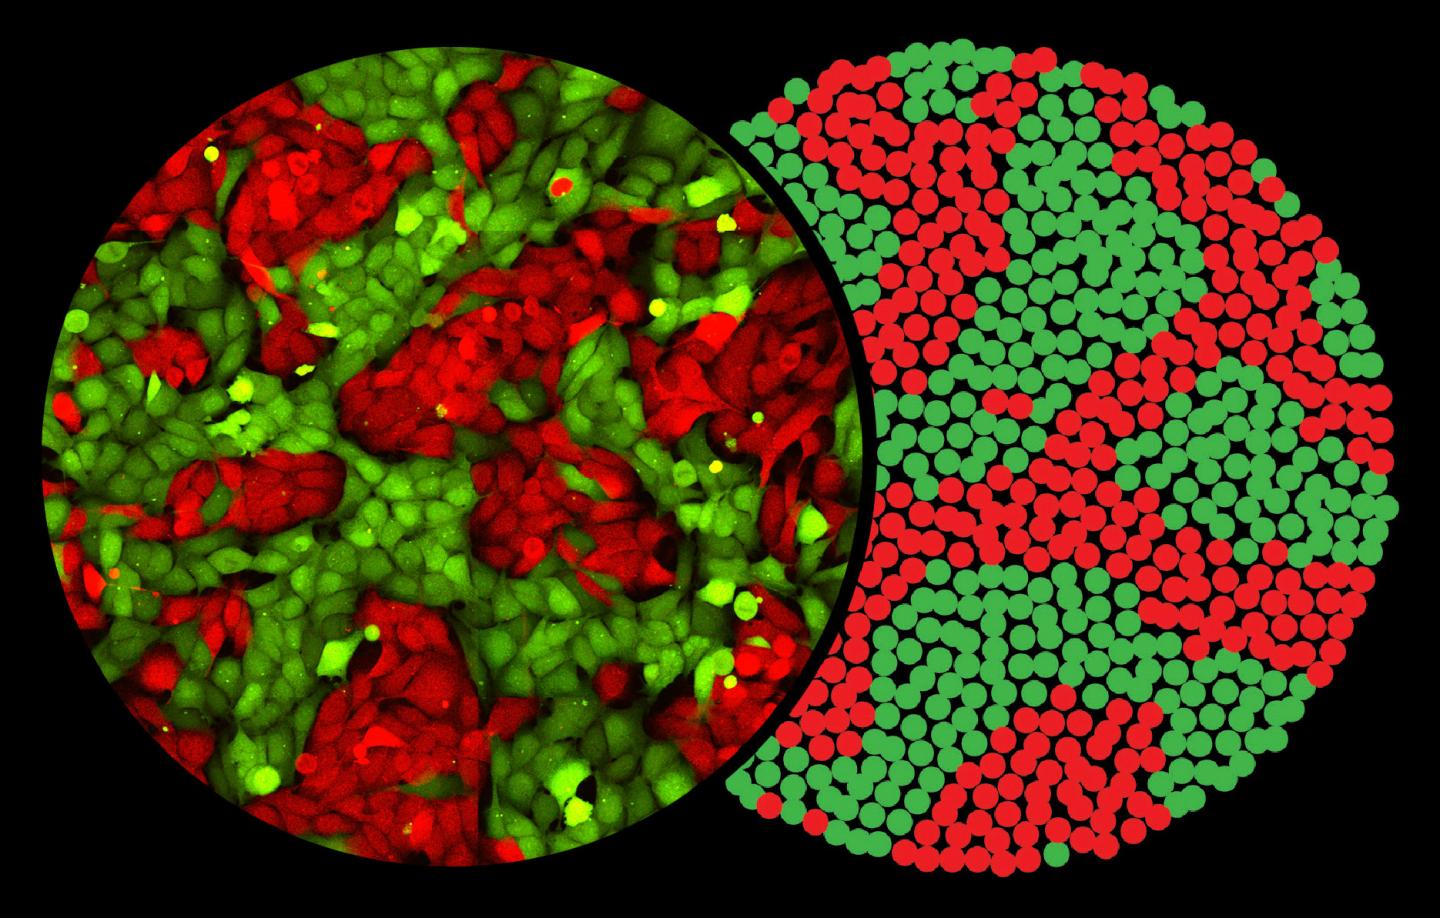 Cell Imaging (Left) and Computer Simulations (Right)